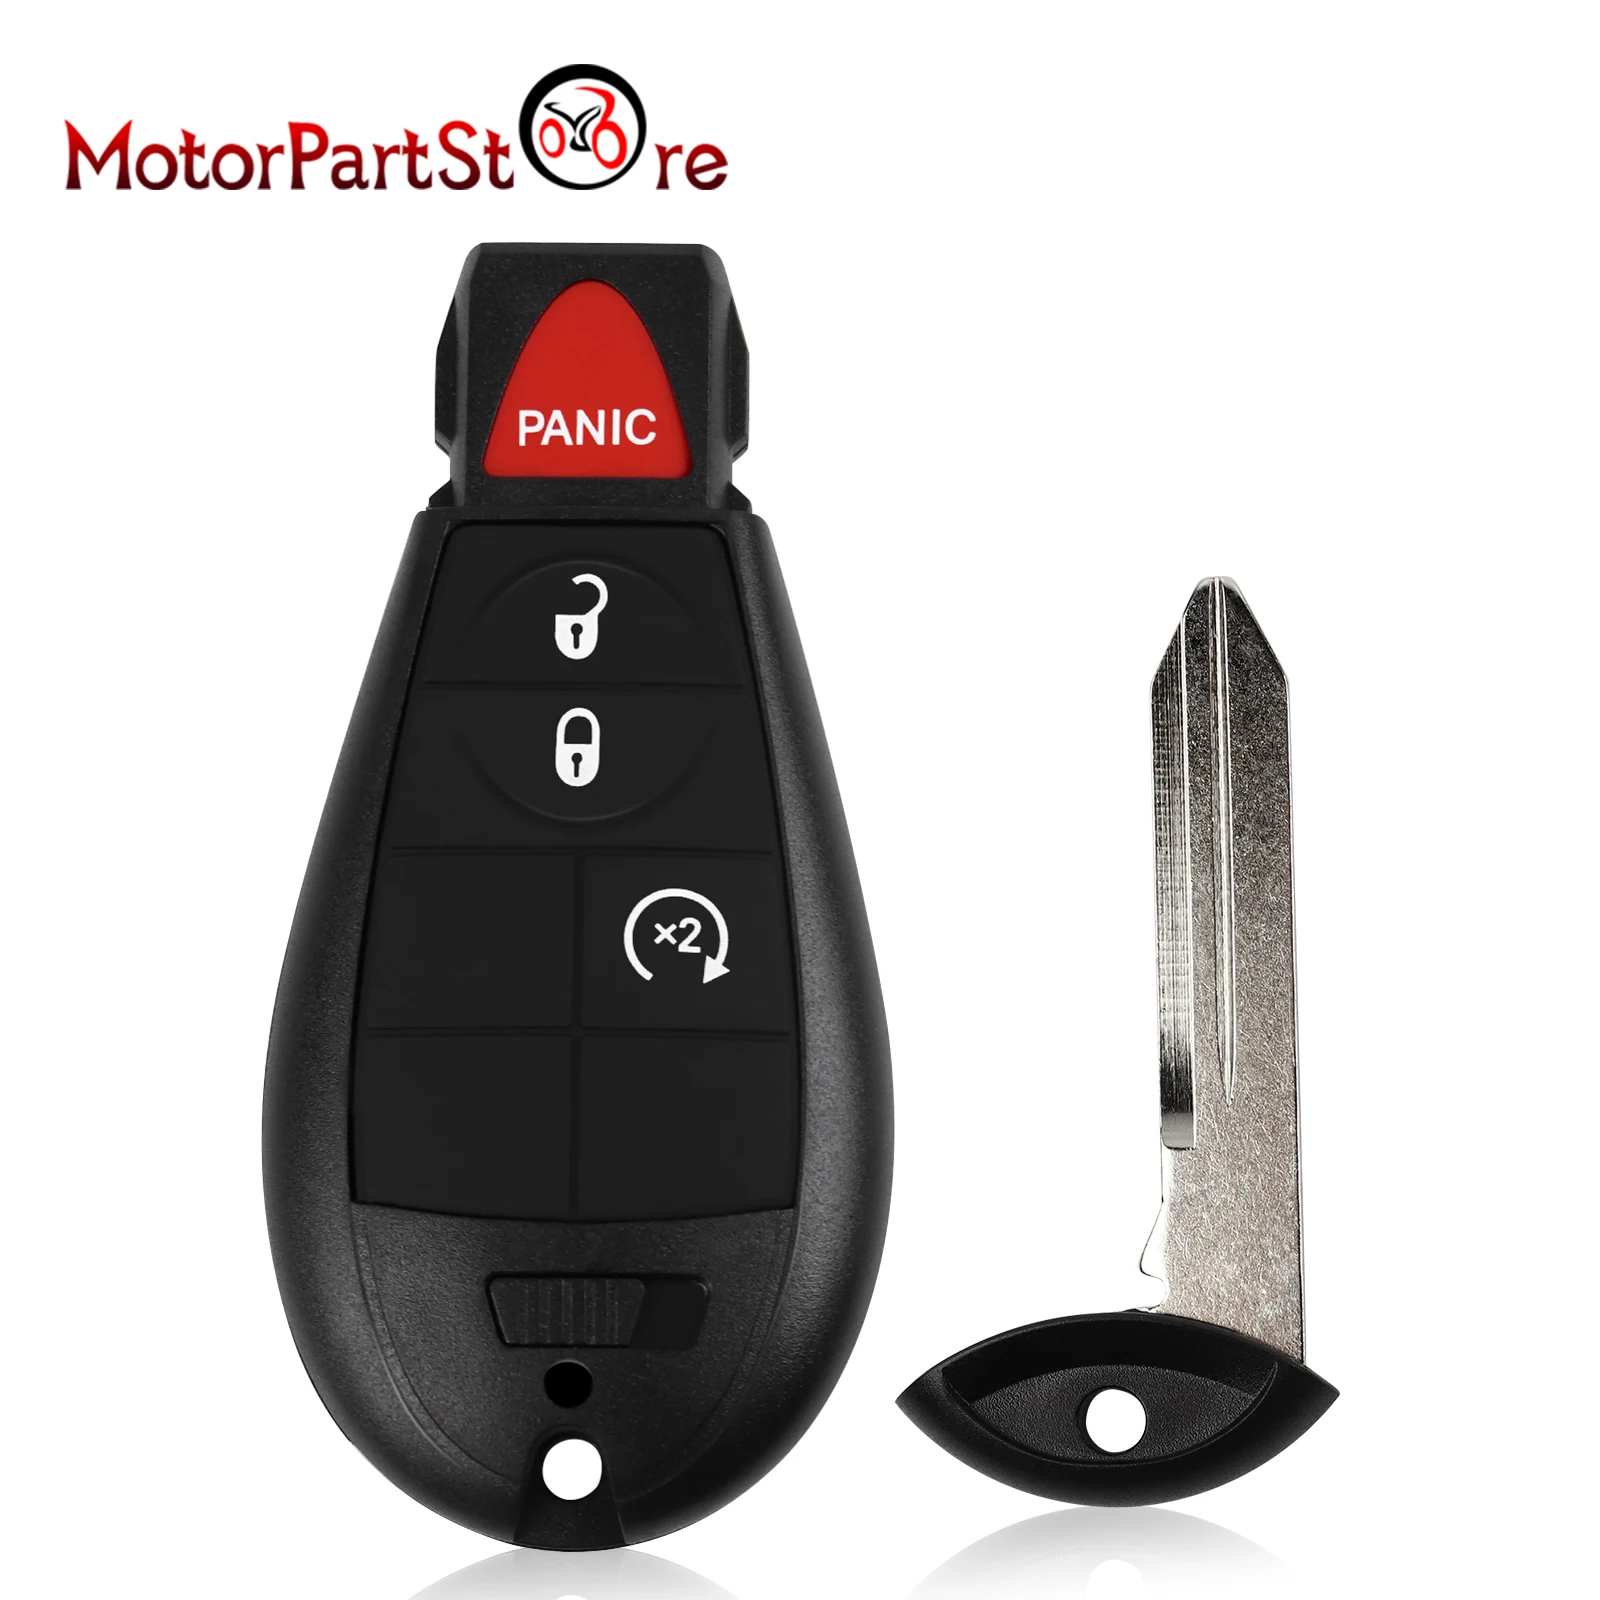 2 Replacement for Dodge 2008-2014 Challenger/Grand Caravan Remote Car Key Fob 3b 